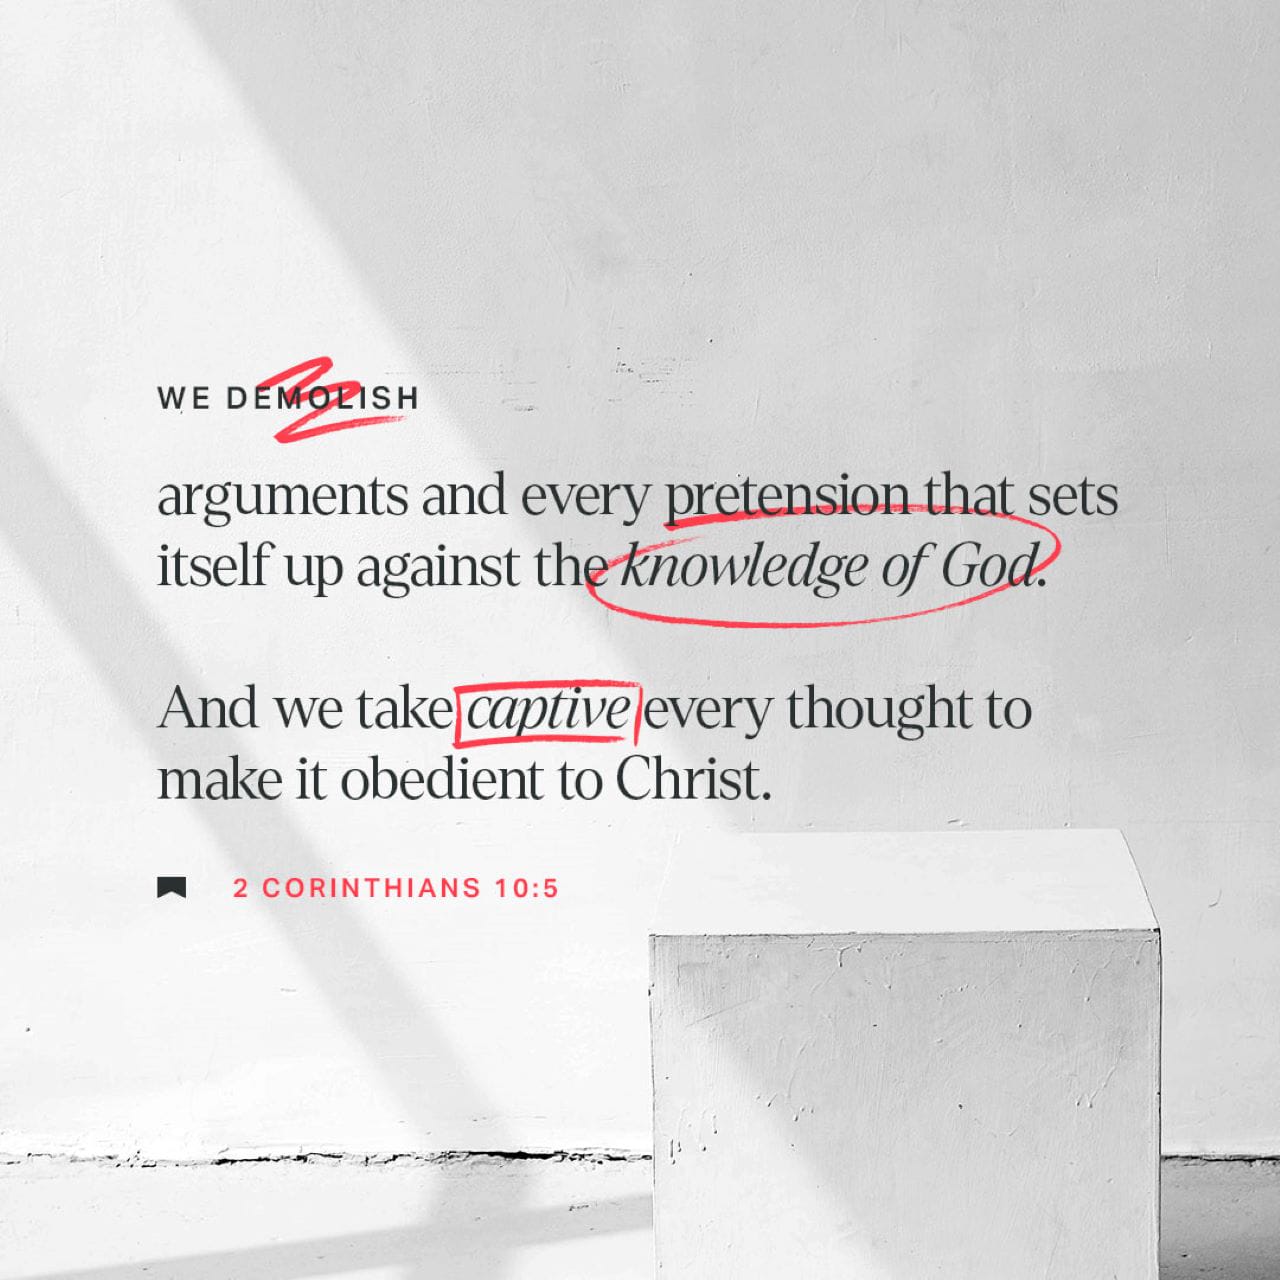 2 Corinthians 10:5 We demolish arguments and every pretension that sets itself up against the knowledge of God, and we take captive every thought to make it obedient to Christ. | New International Version (NIV) | Download The Bible App Now